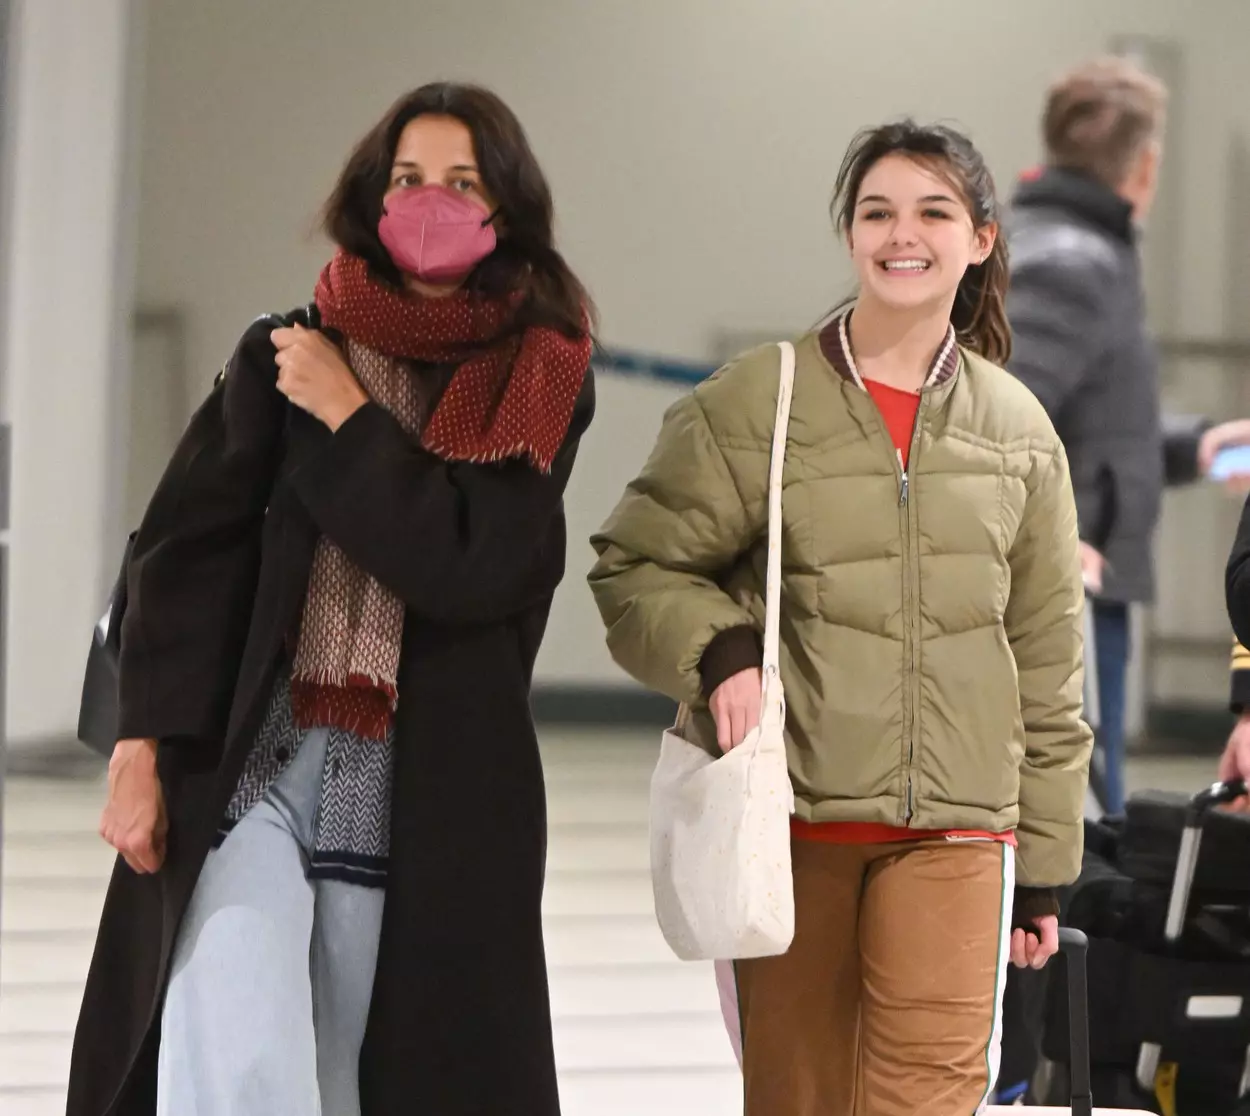 EXCLUSIVE: Katie Holmes and Suri Cruise are Spotted at Newark Airport in New Jersey.